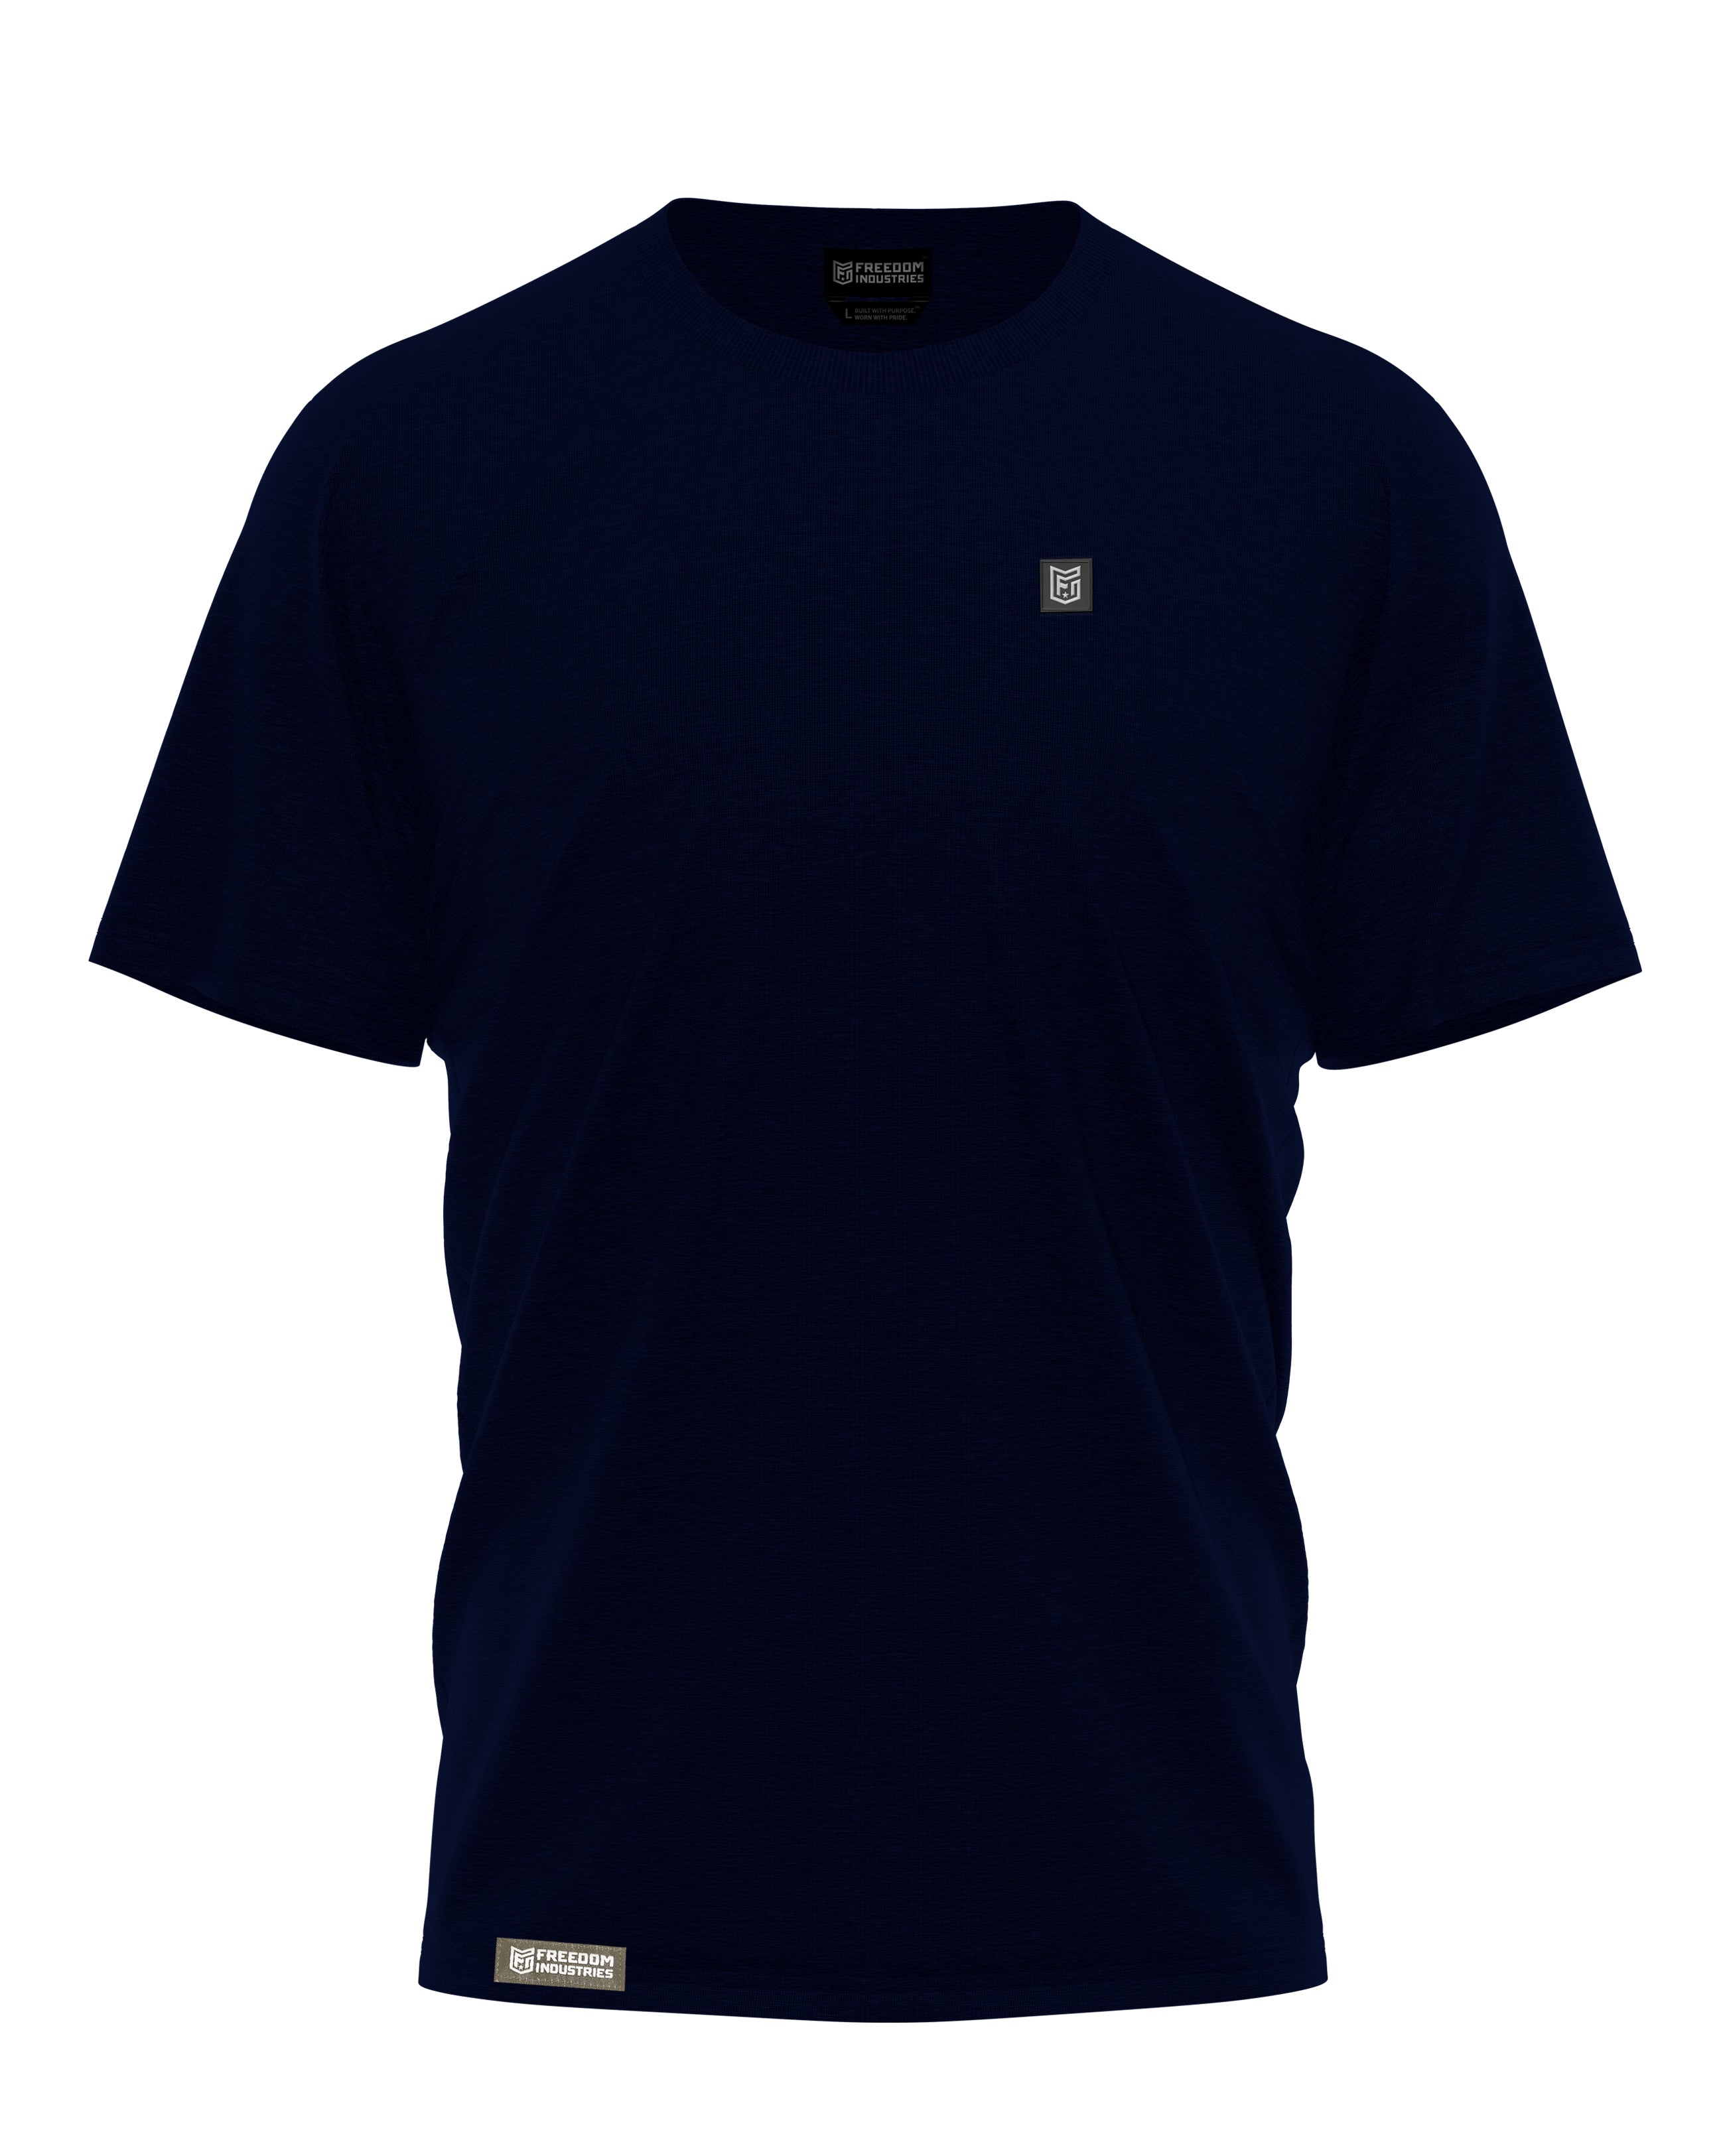 F.I.E.L.D. WORKWEAR DAILY SHIRT - NAVY - FREEDOM INDUSTRIES (4452068917320)